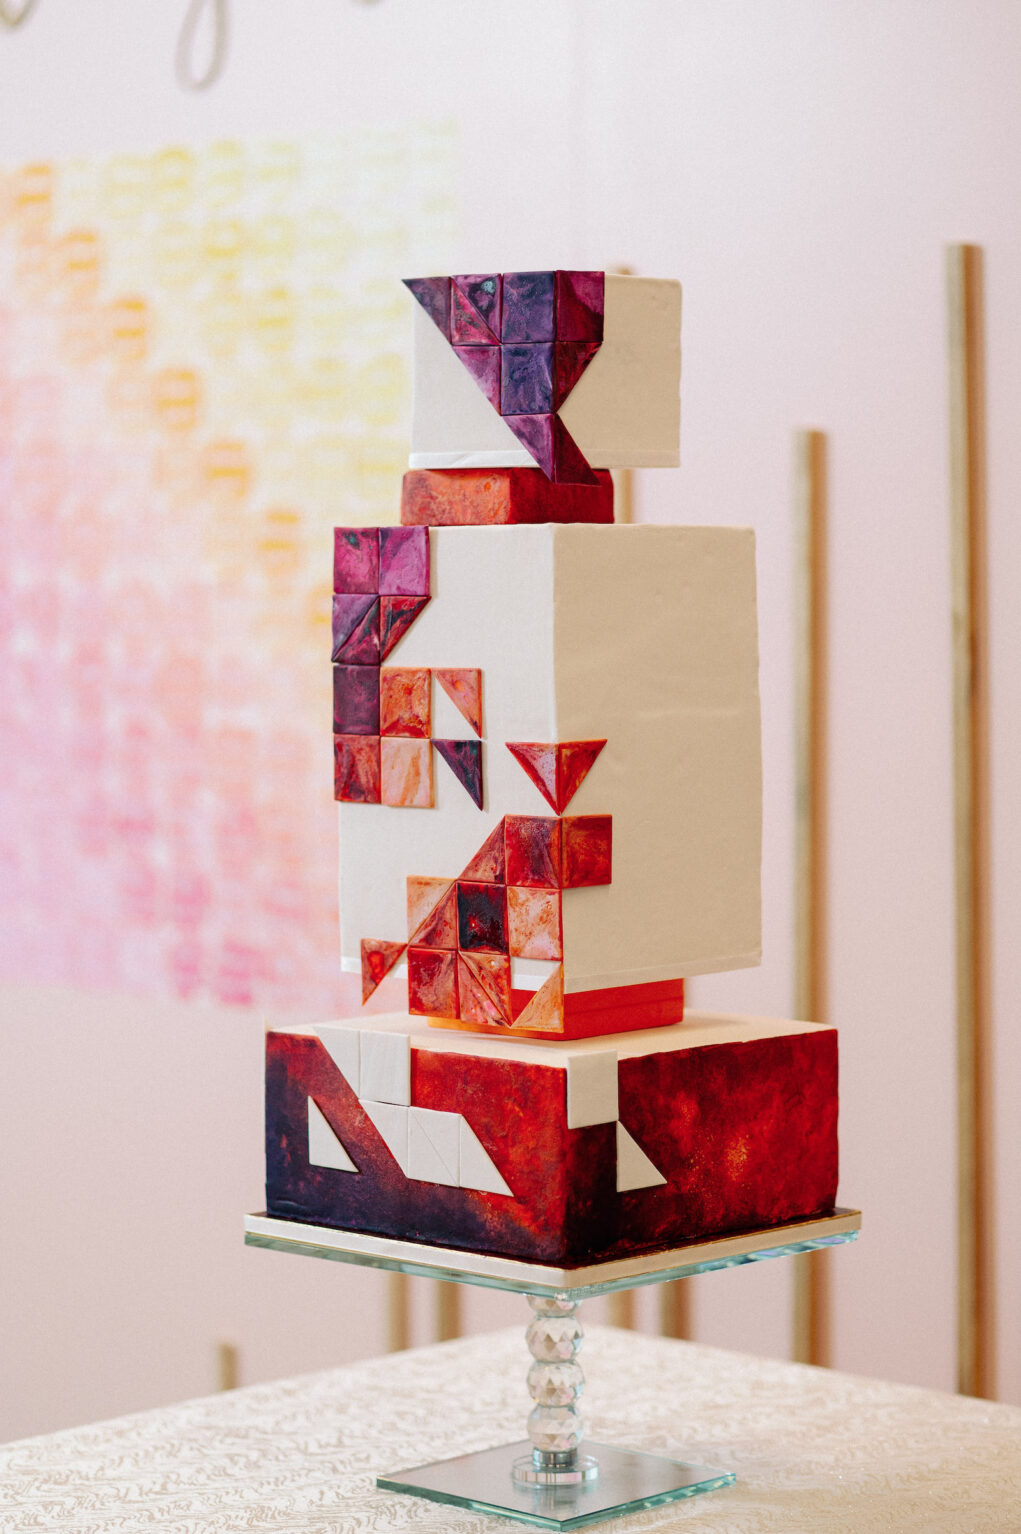 Unique Whimsical Geometric Three Tier Wedding Cake, Red, Purple, and Orange Swirled Painted Shapes | Tampa Bay Wedding Photographer Dewitt for Love | Wedding Cake The Artistic Whisk